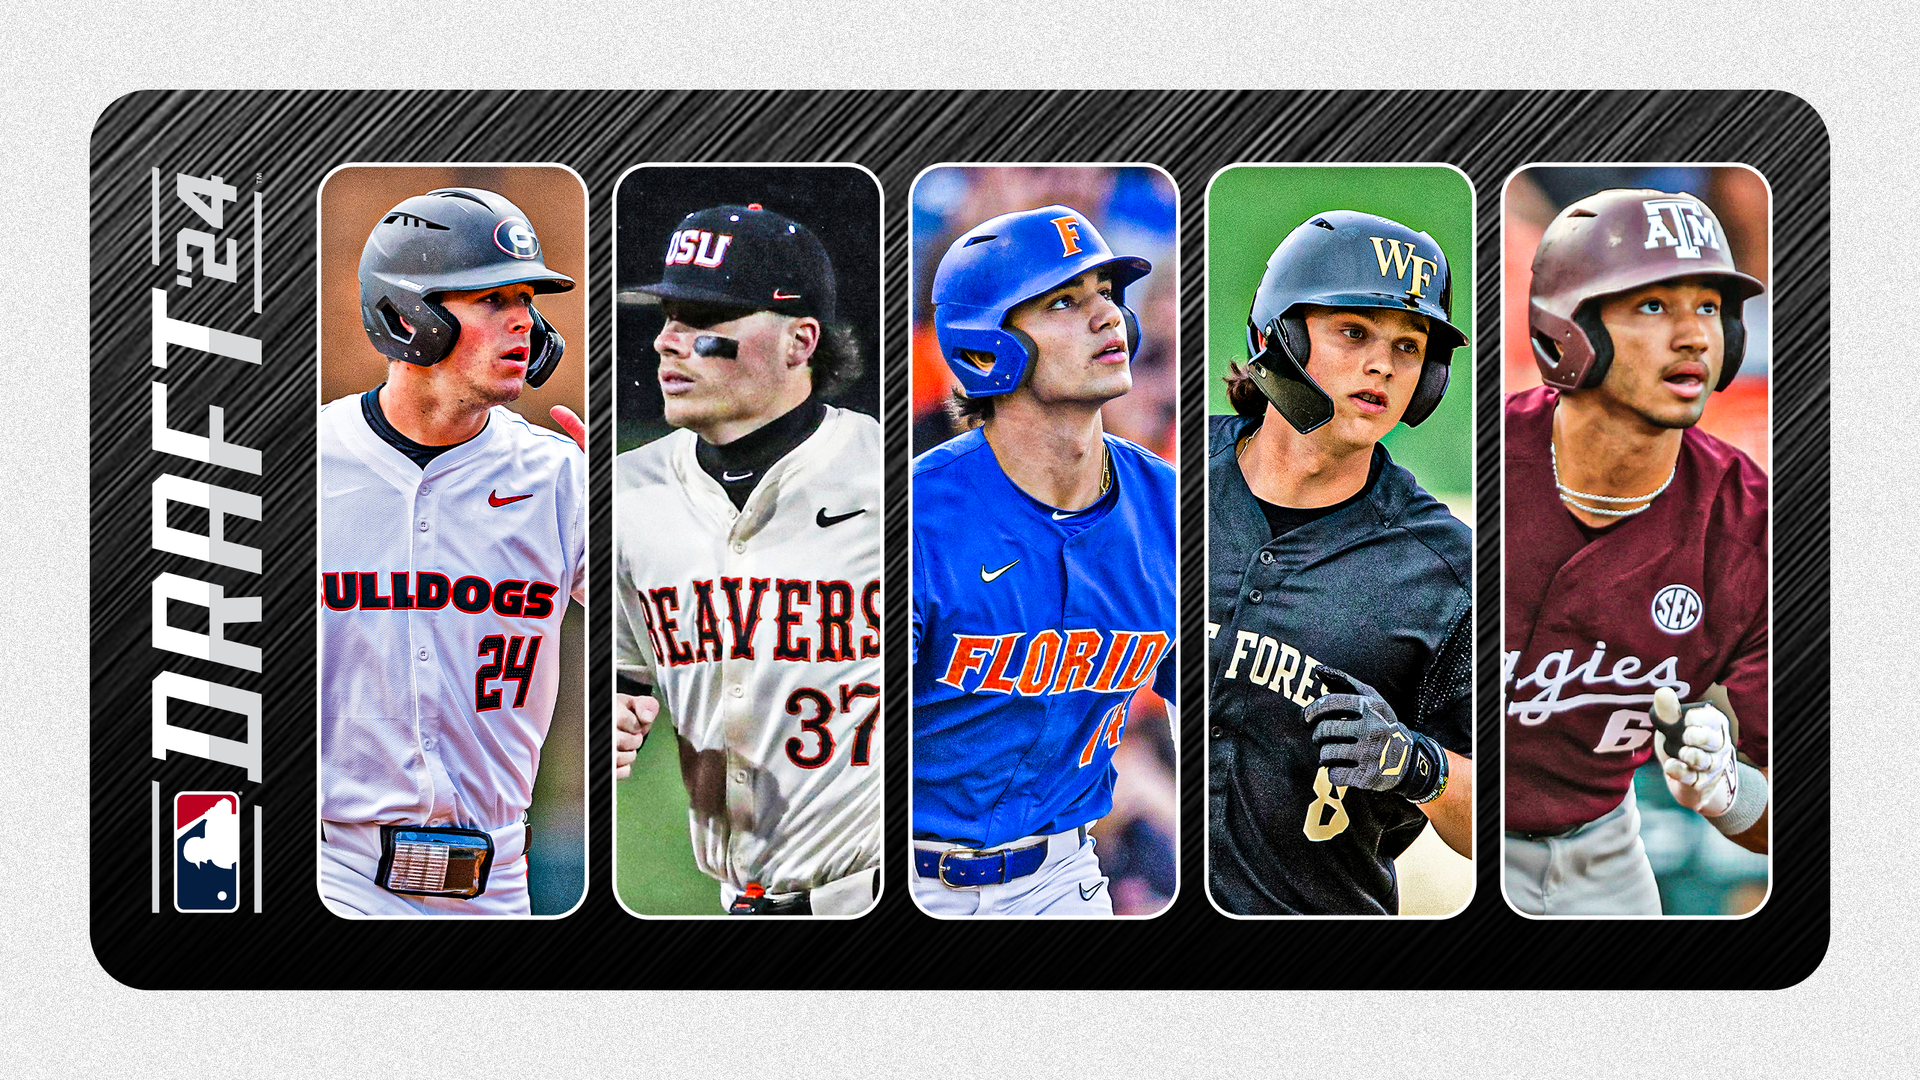 Top 5 Draft prospects